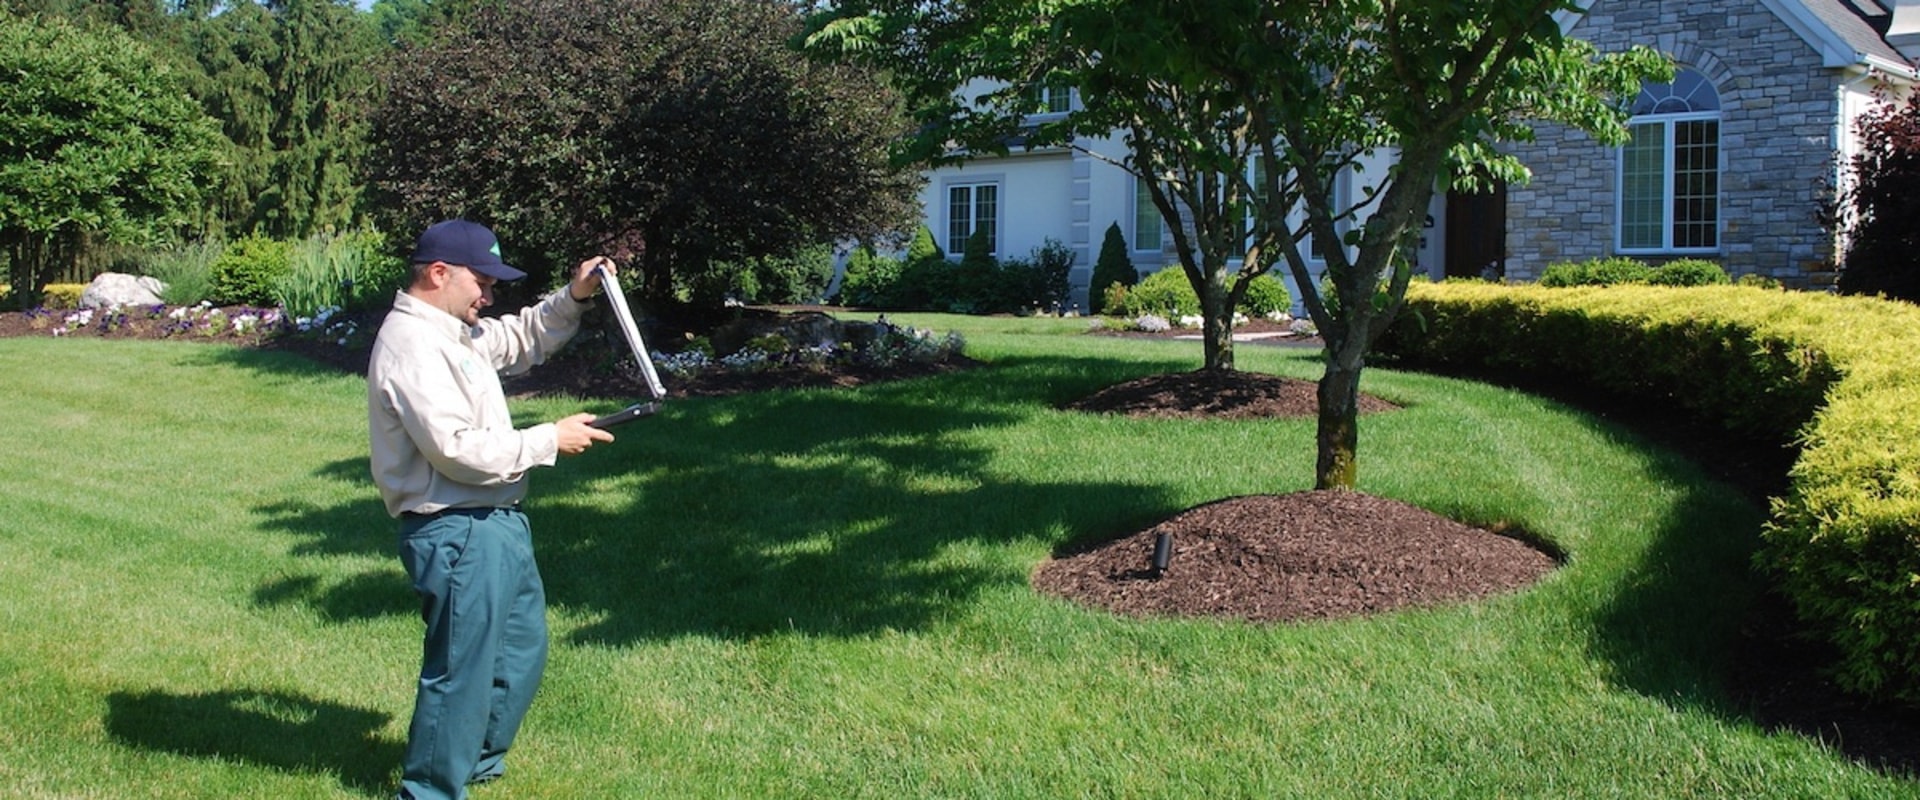 Why You Should Hire A Tree Care Service For Tree Care And Landscape Tree Planting In Pembroke Pines